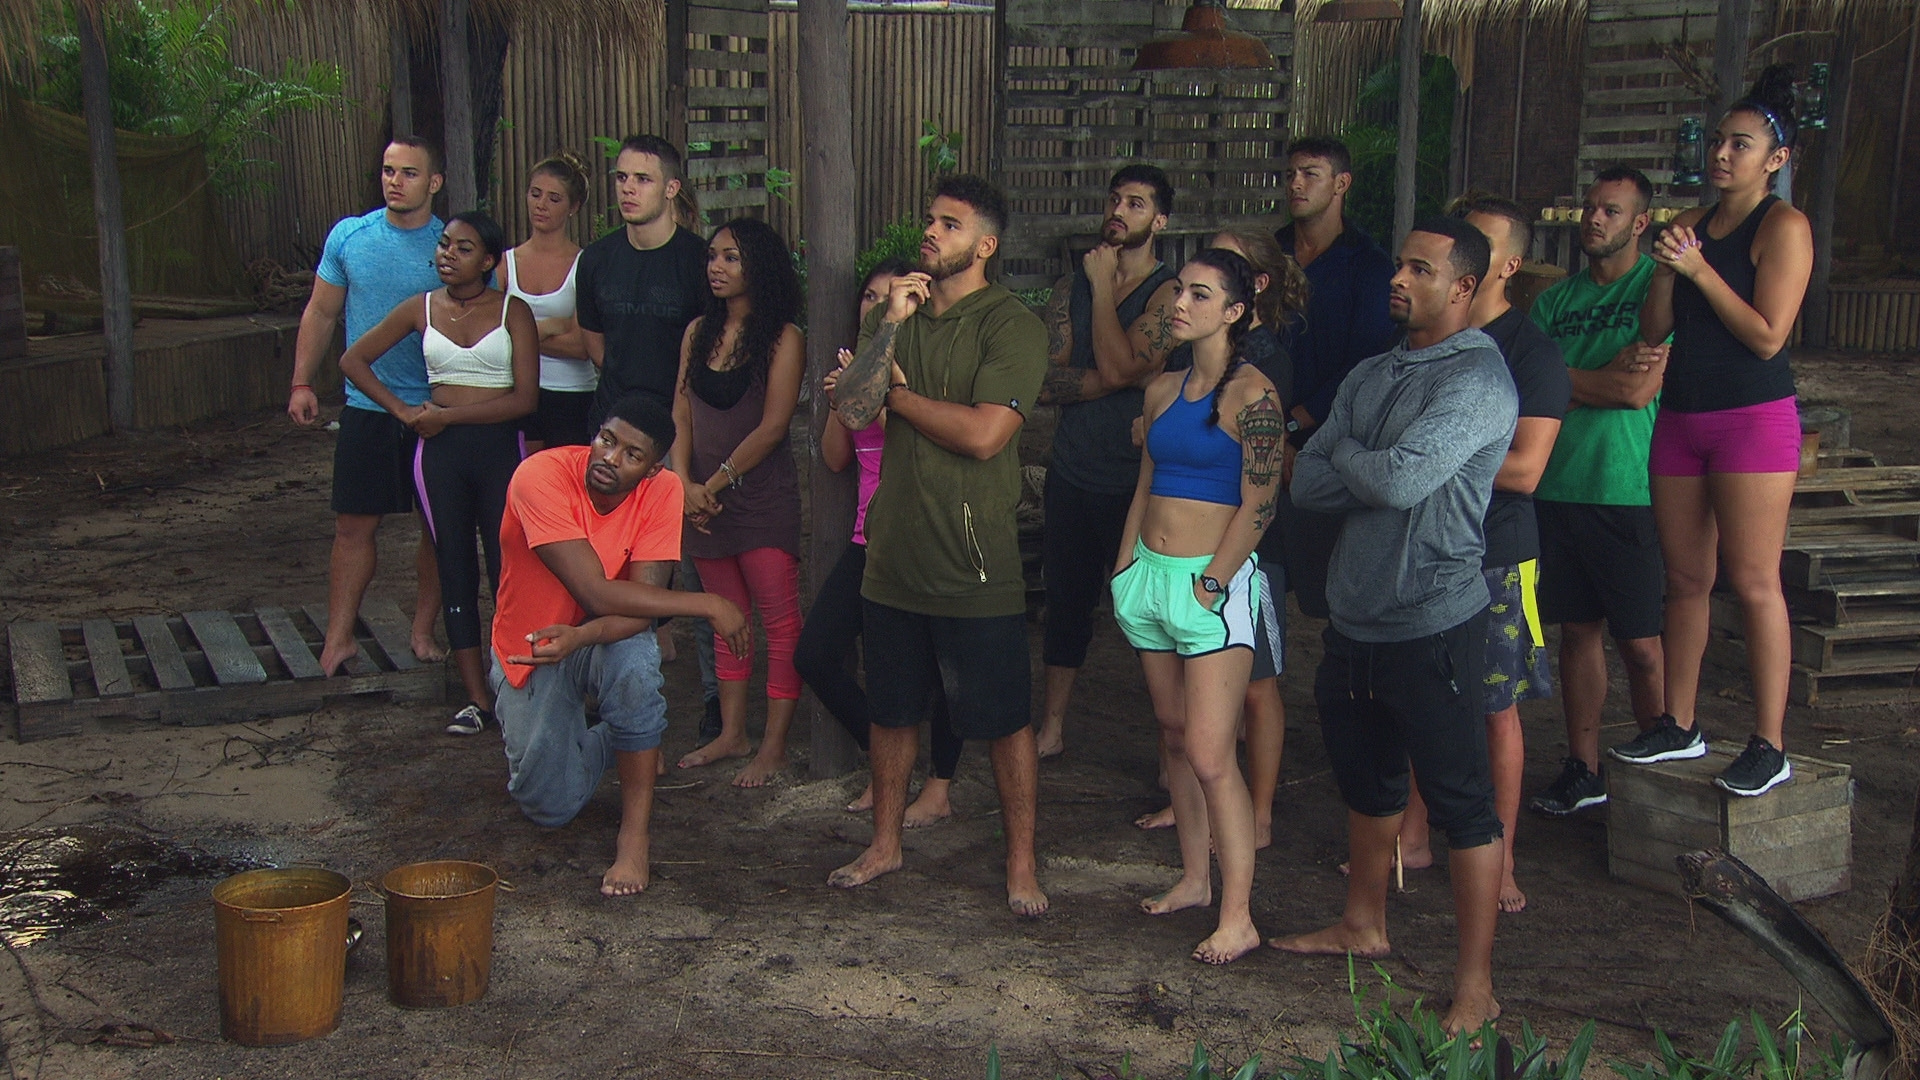 Watch The Challenge Season 29 Episode 1: Gimme - Full show on Paramount Plus